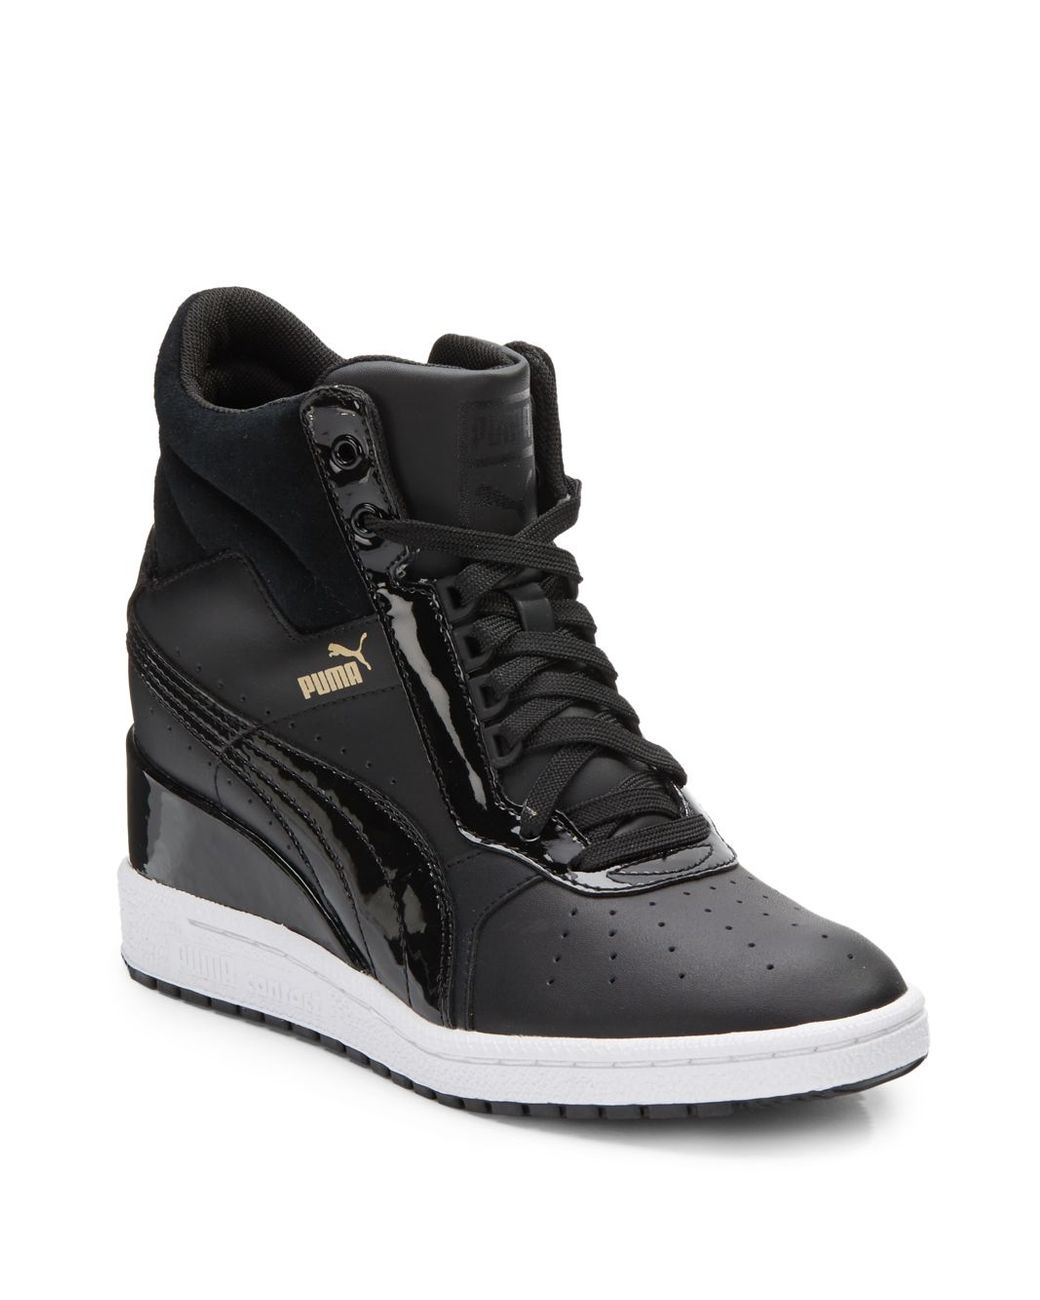 PUMA Advantage Leather Wedge Sneakers in Black | Lyst